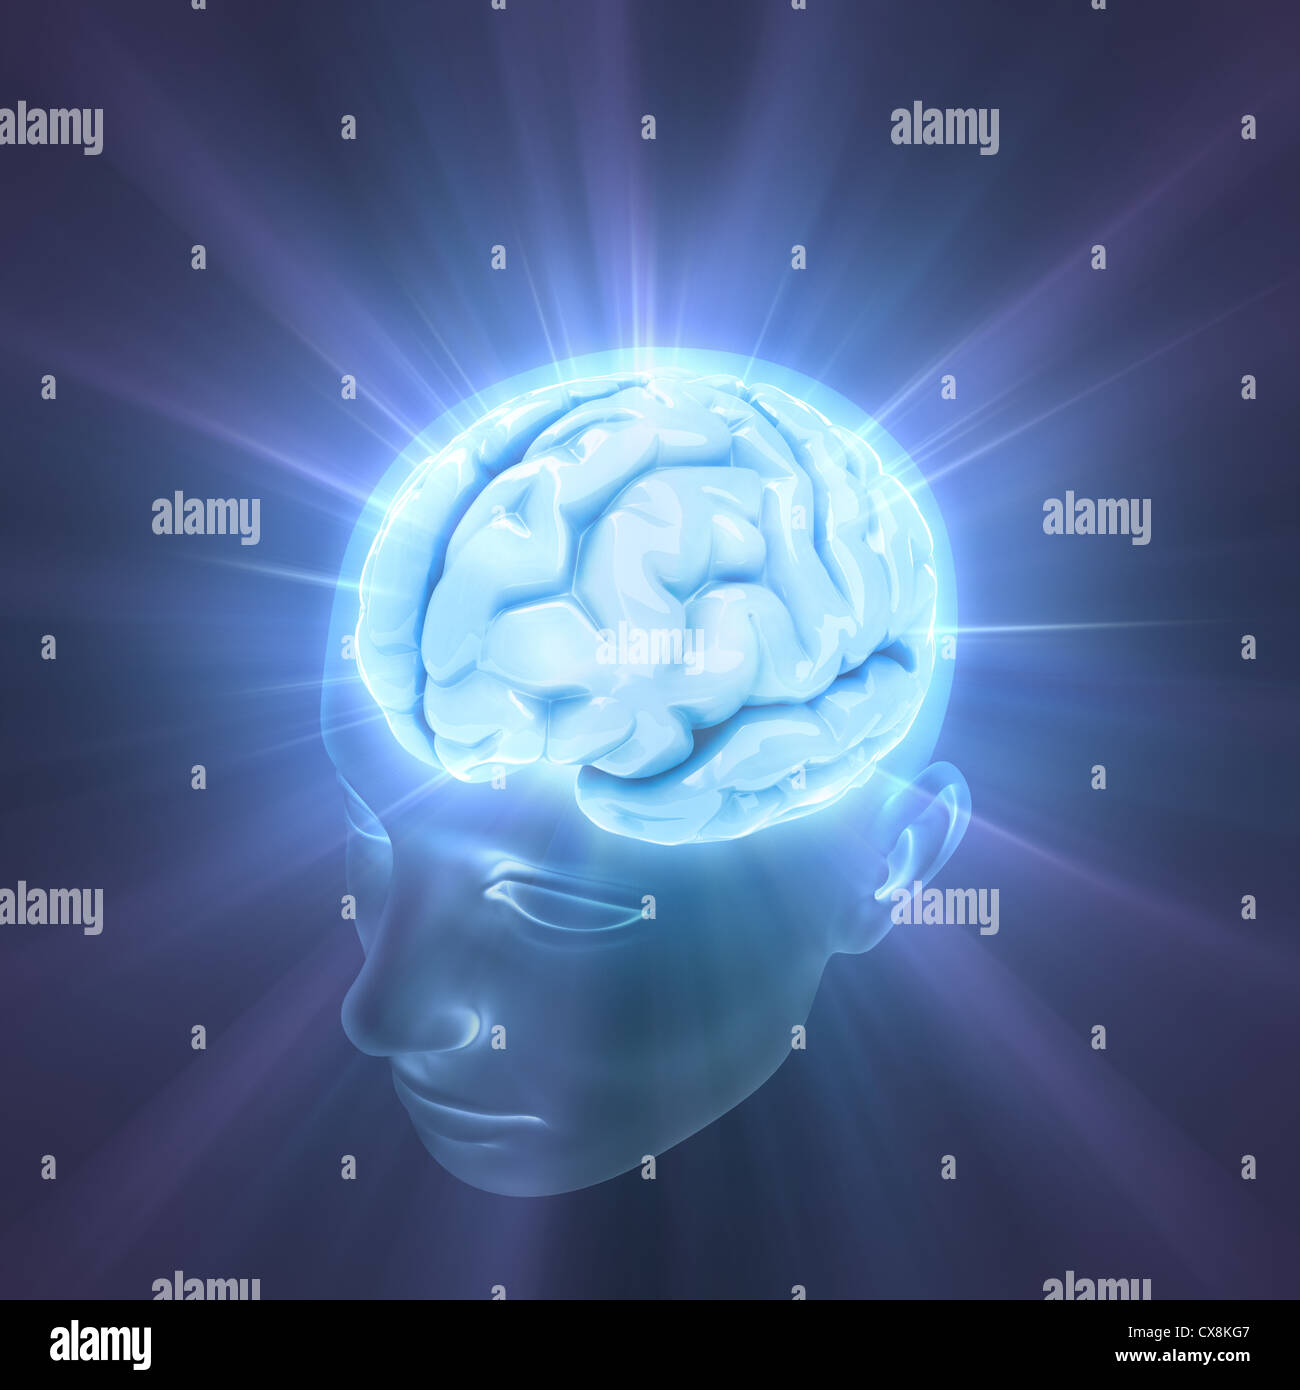 Head illuminated by the energy of the brain. Concept of thinking, the power of mind. Stock Photo